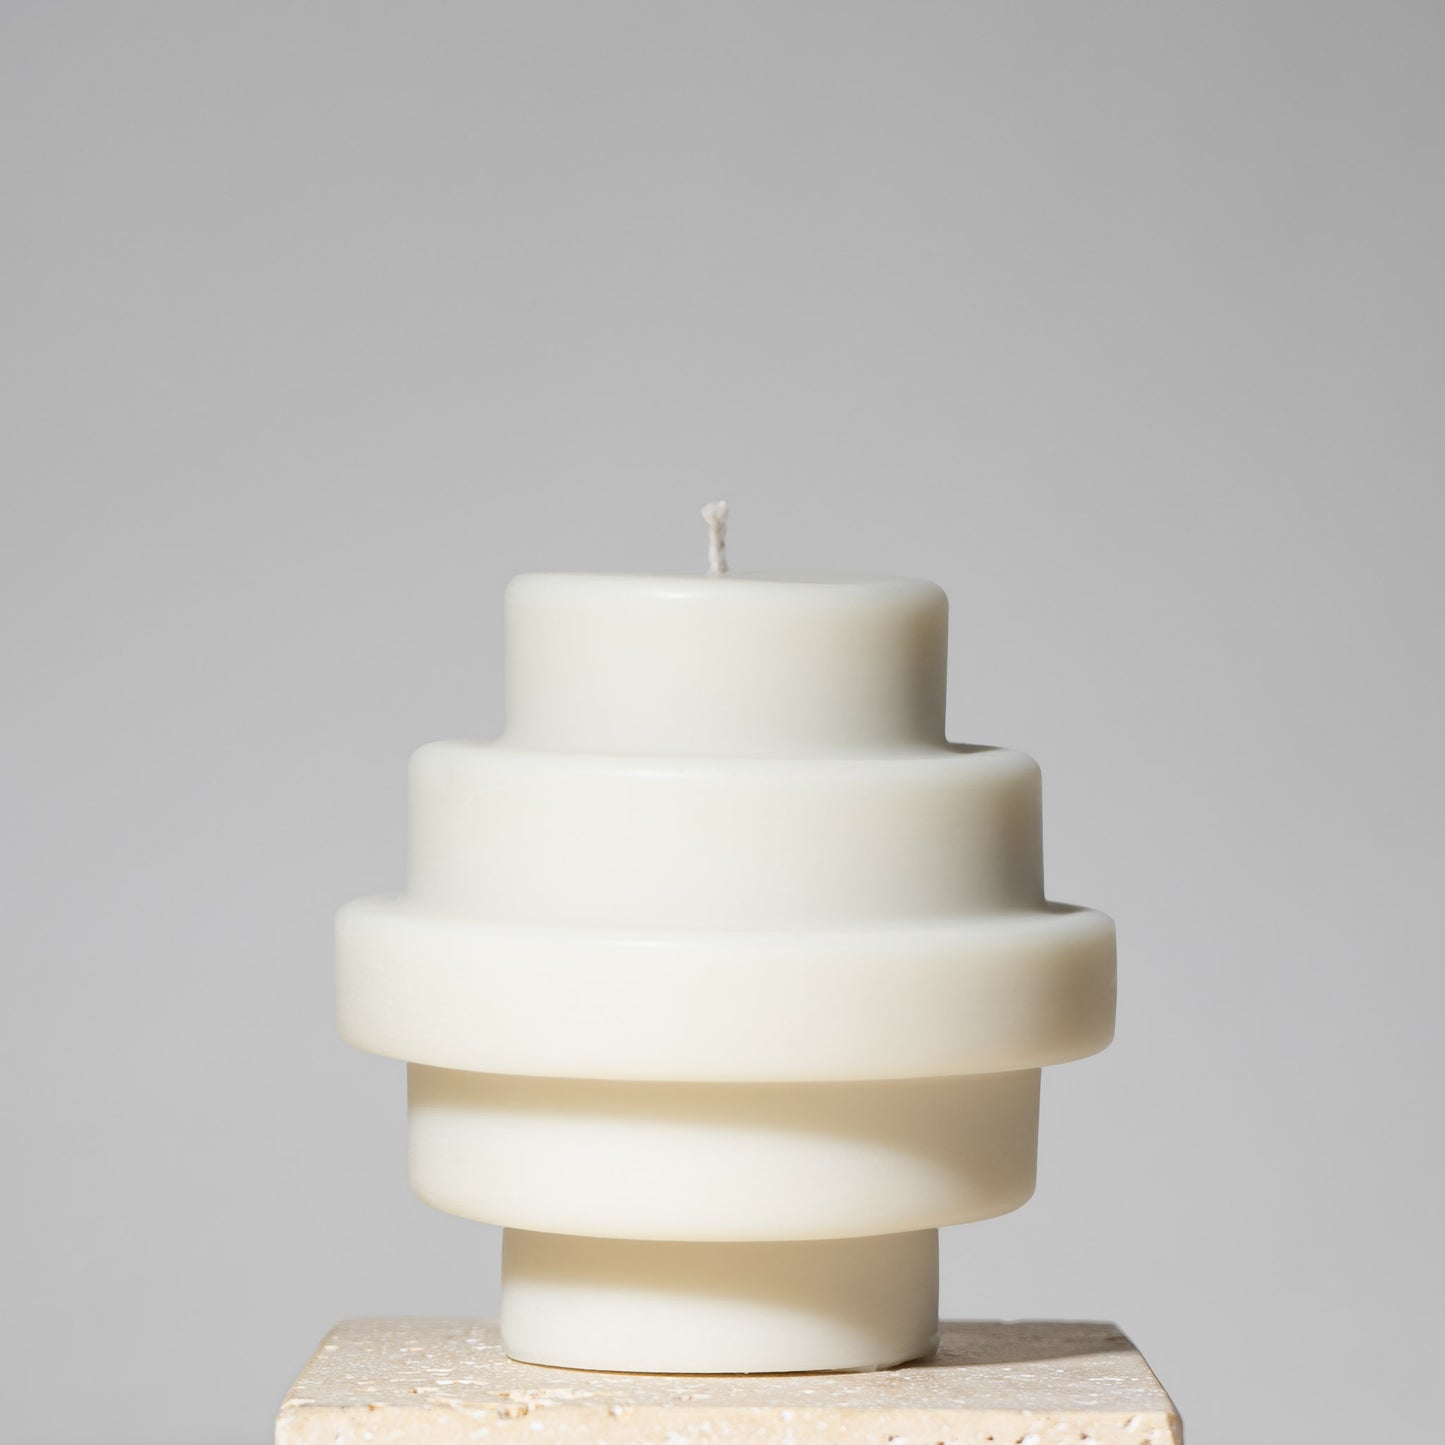 postmodern Memphis pedestal sculpture temple pillar candle handcrafted in alabaster white